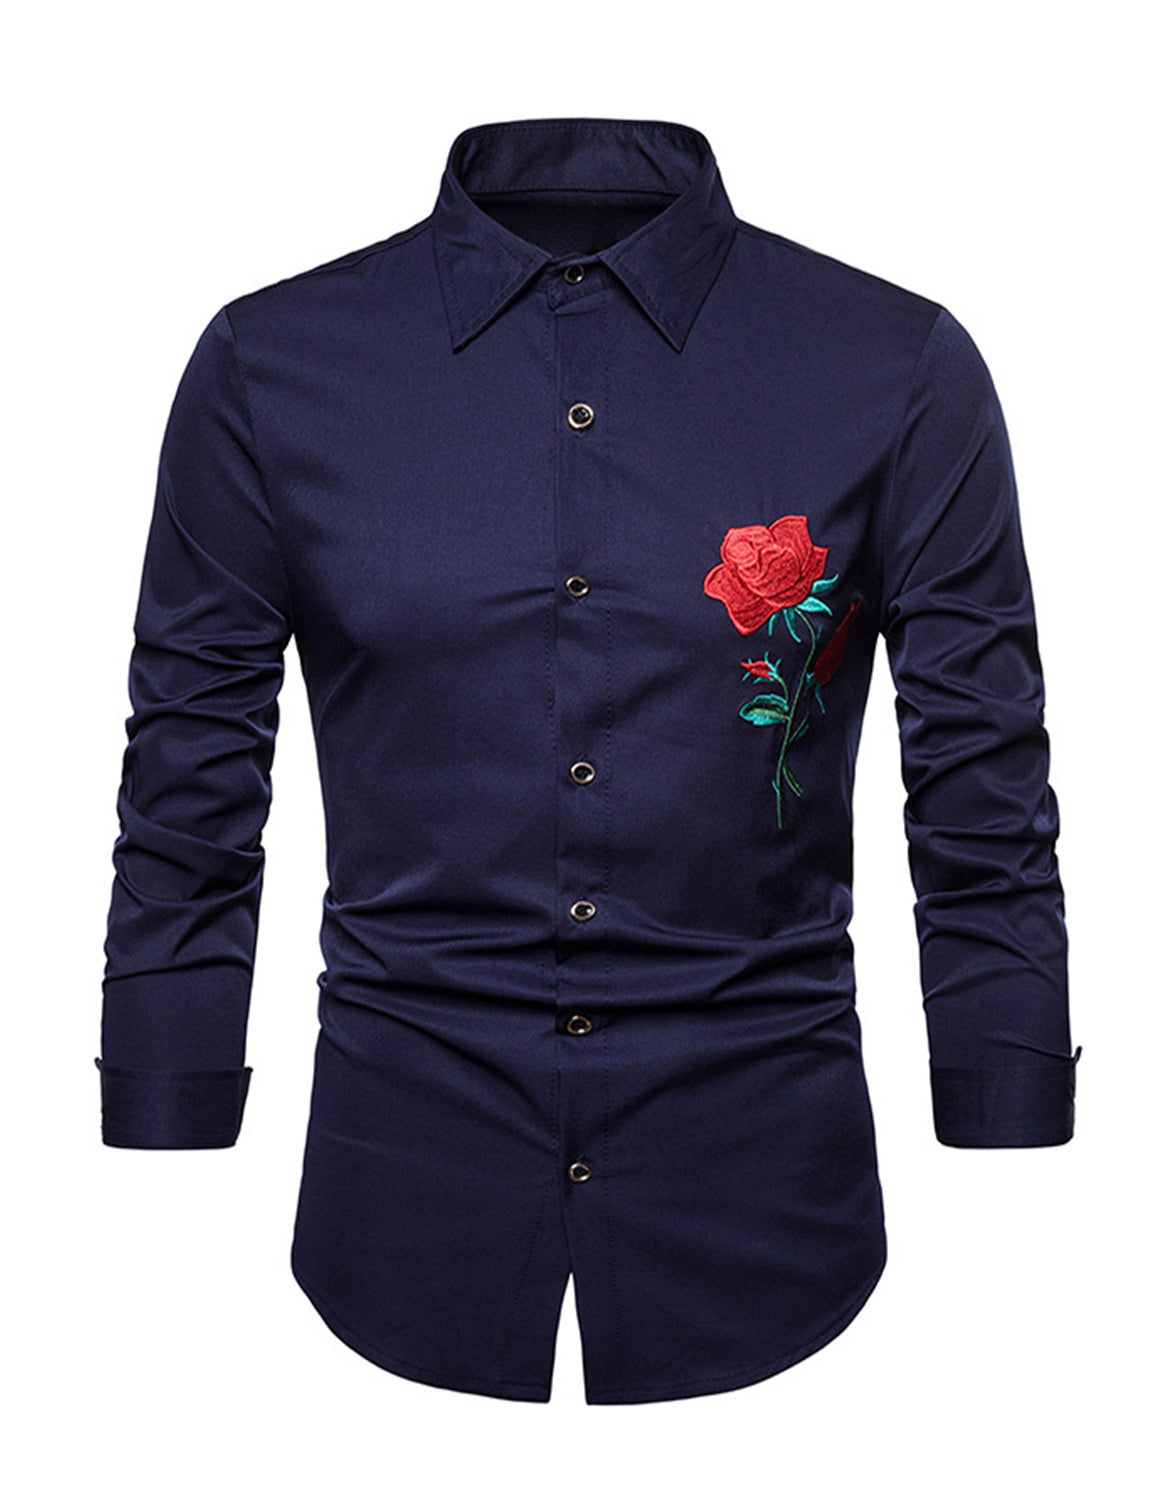 Men's Rose Embroidery Casual Long Sleeve Button Dress Shirt